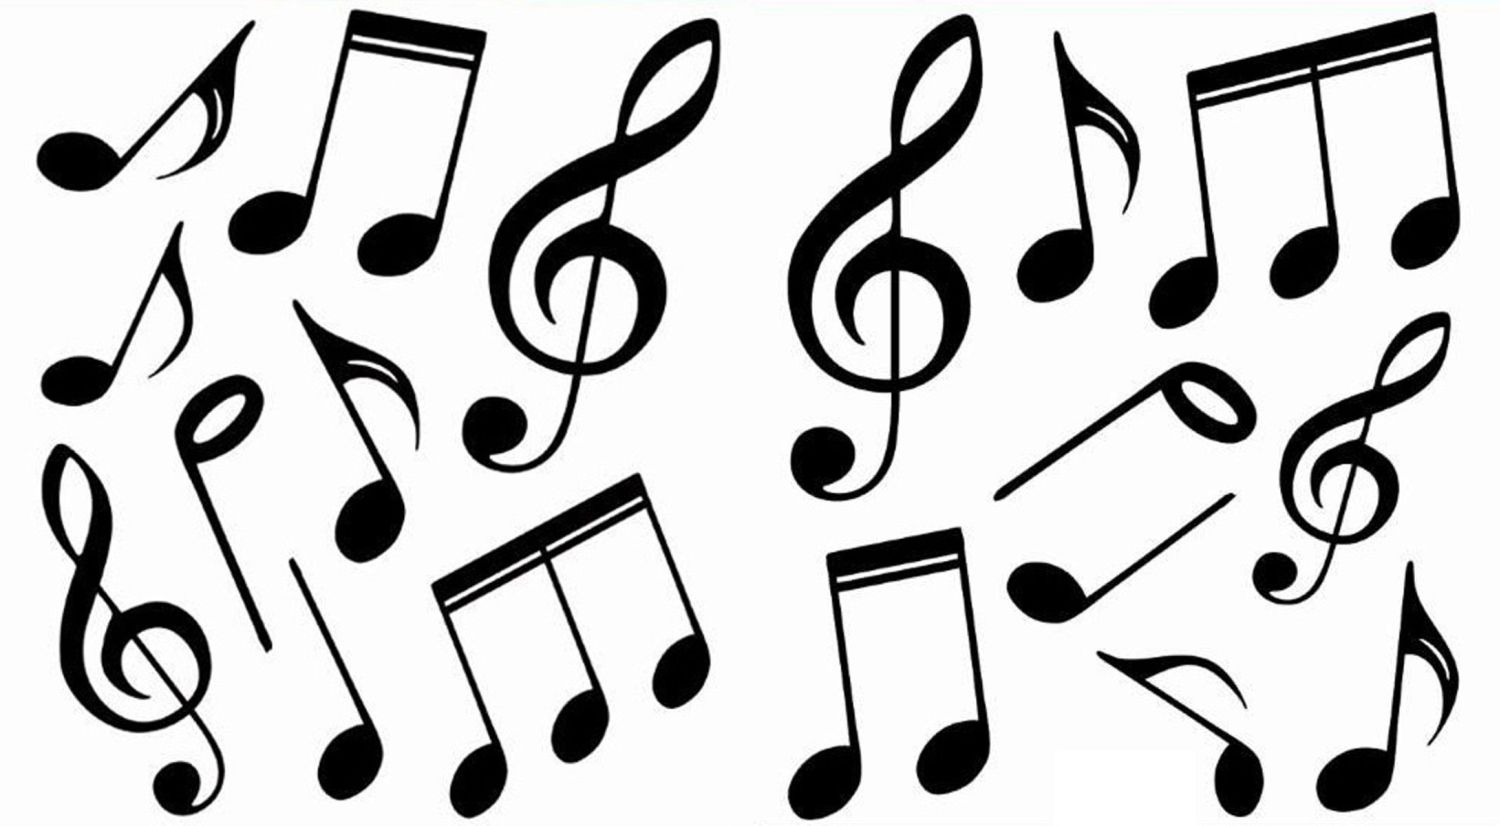 Music notes  black and white music notes symbols clipart